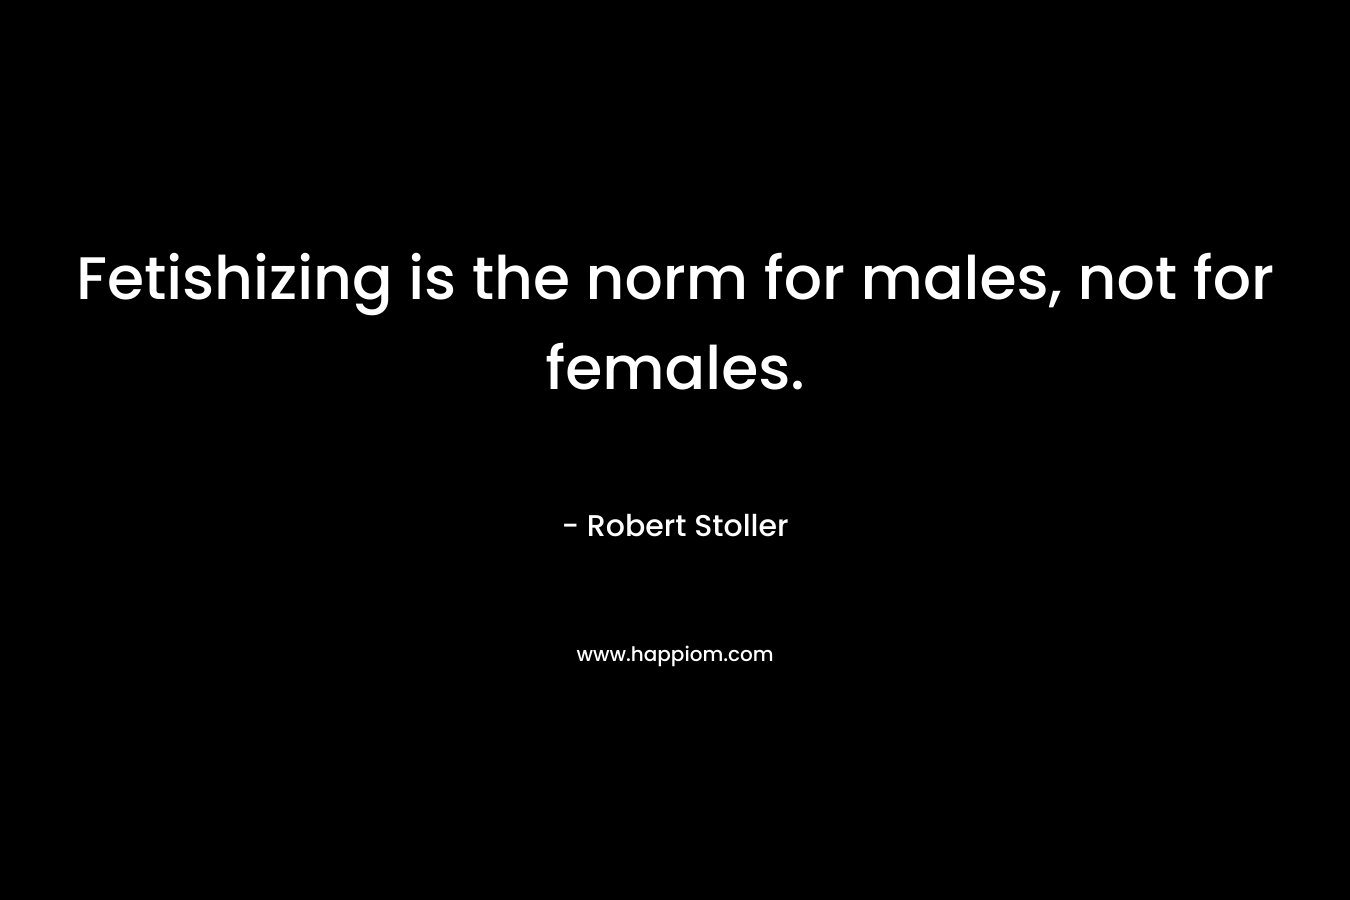 Fetishizing is the norm for males, not for females. – Robert Stoller